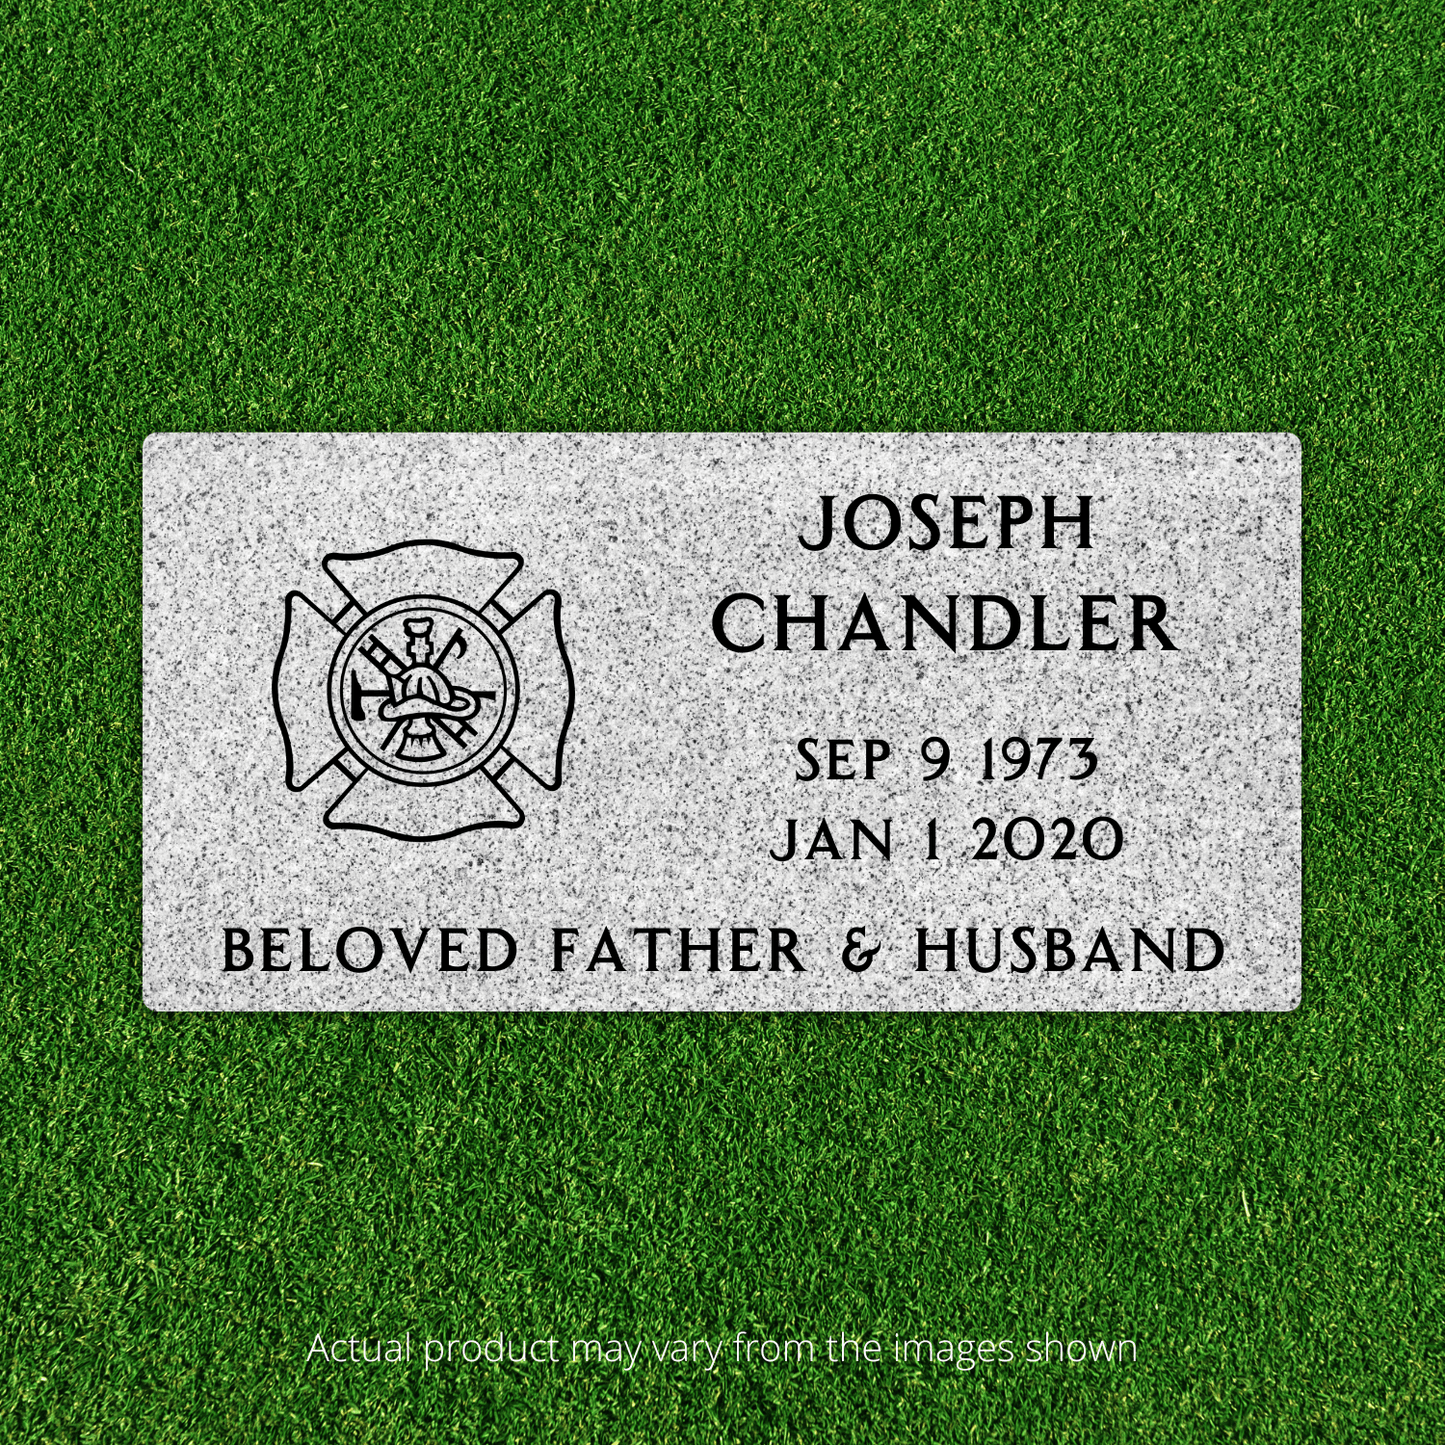 Flat Headstone Marker with One Symbol - (20in x 10in x 3in) - Markers & Headstones